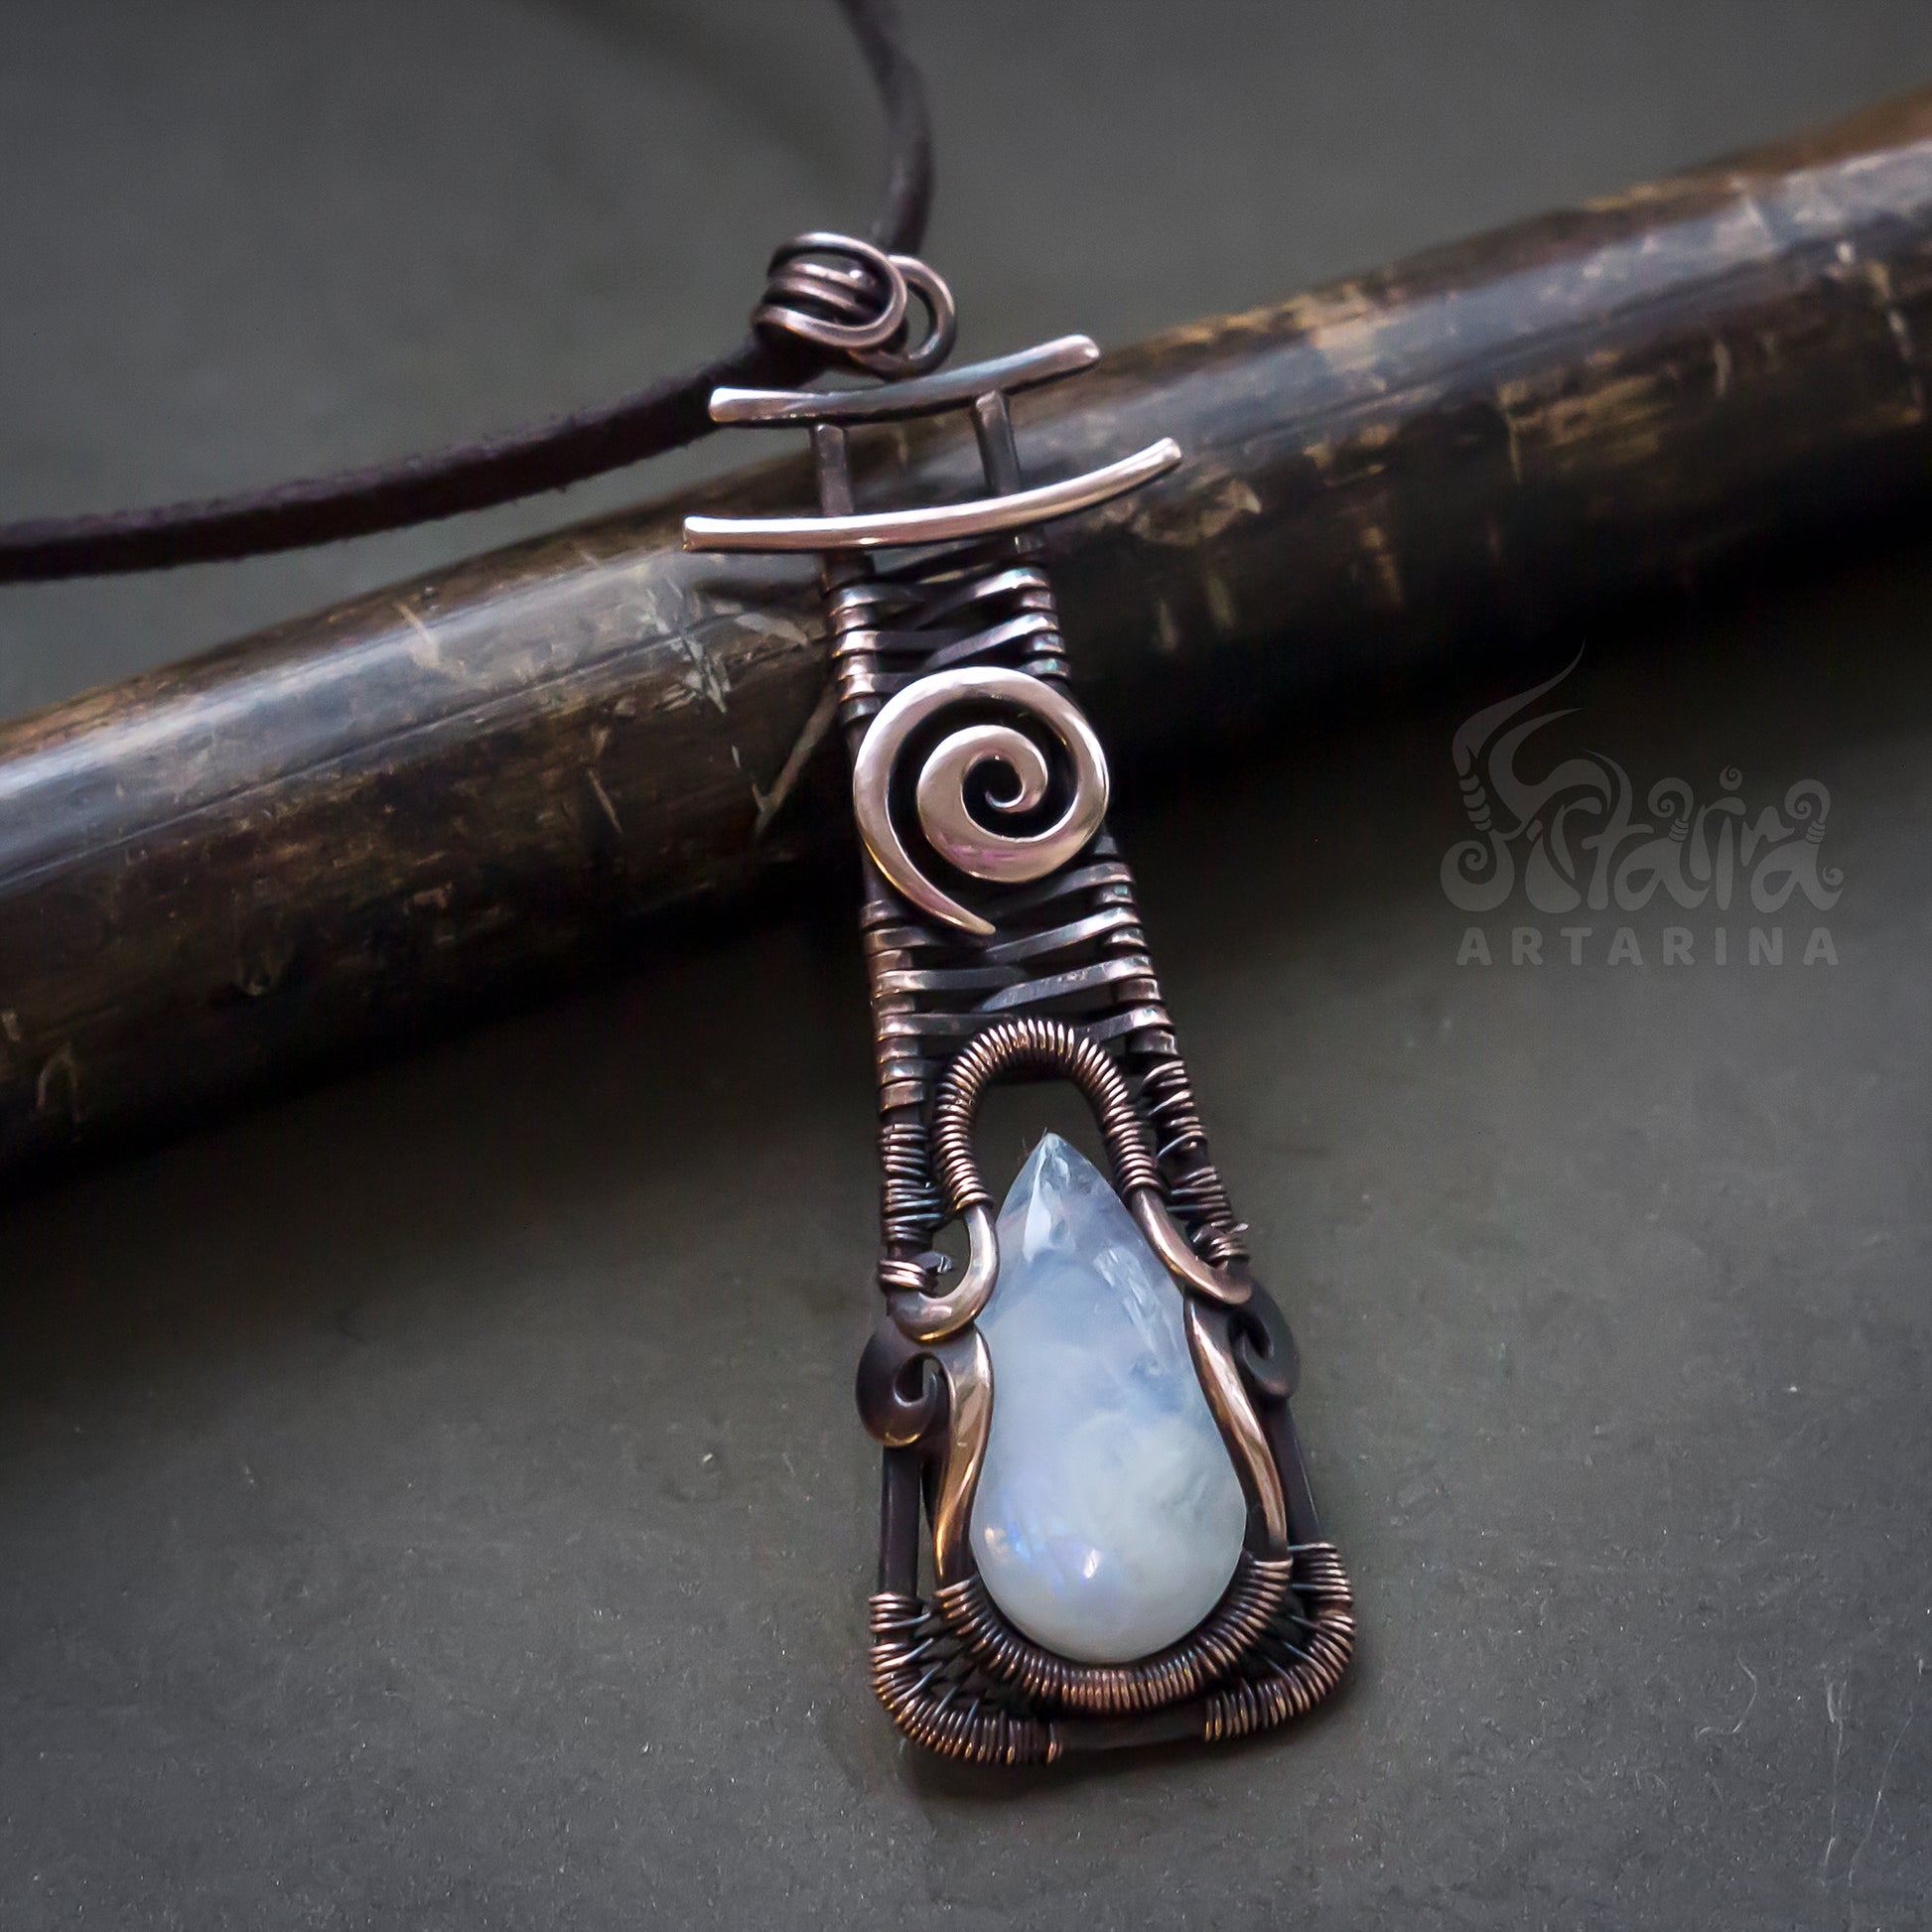 Copper wirework necklace with moonstone pic 1